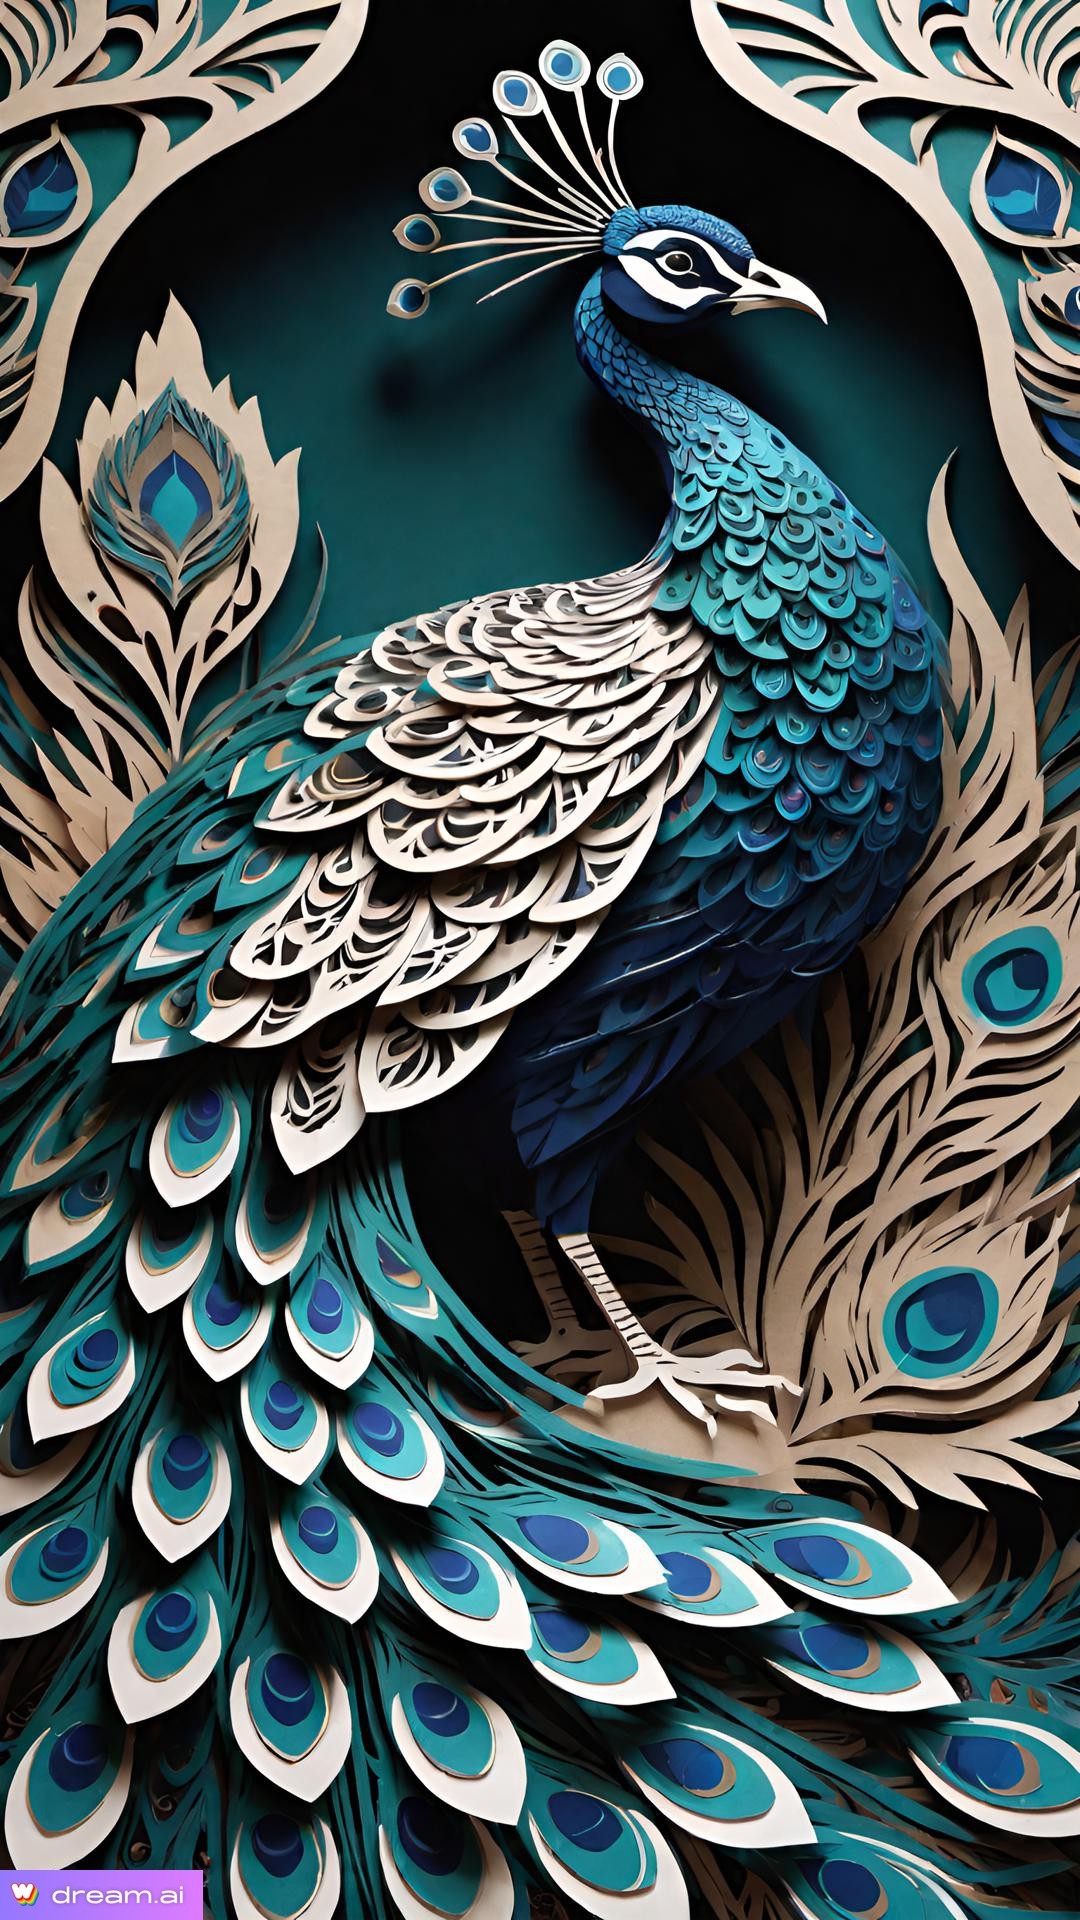 a peacock made out of paper